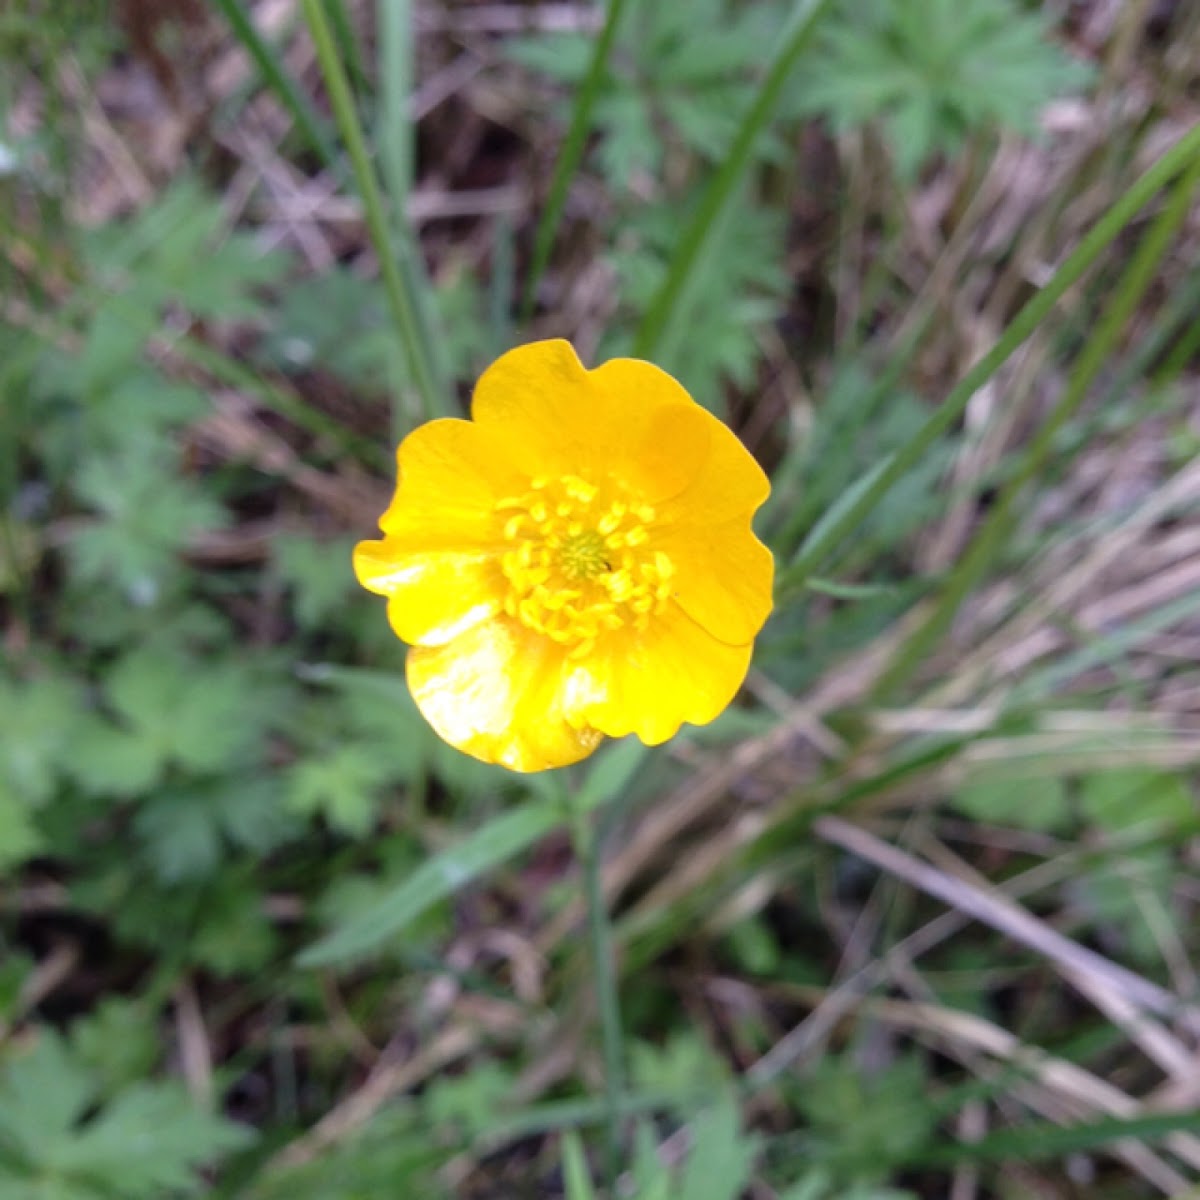 Giant buttercup